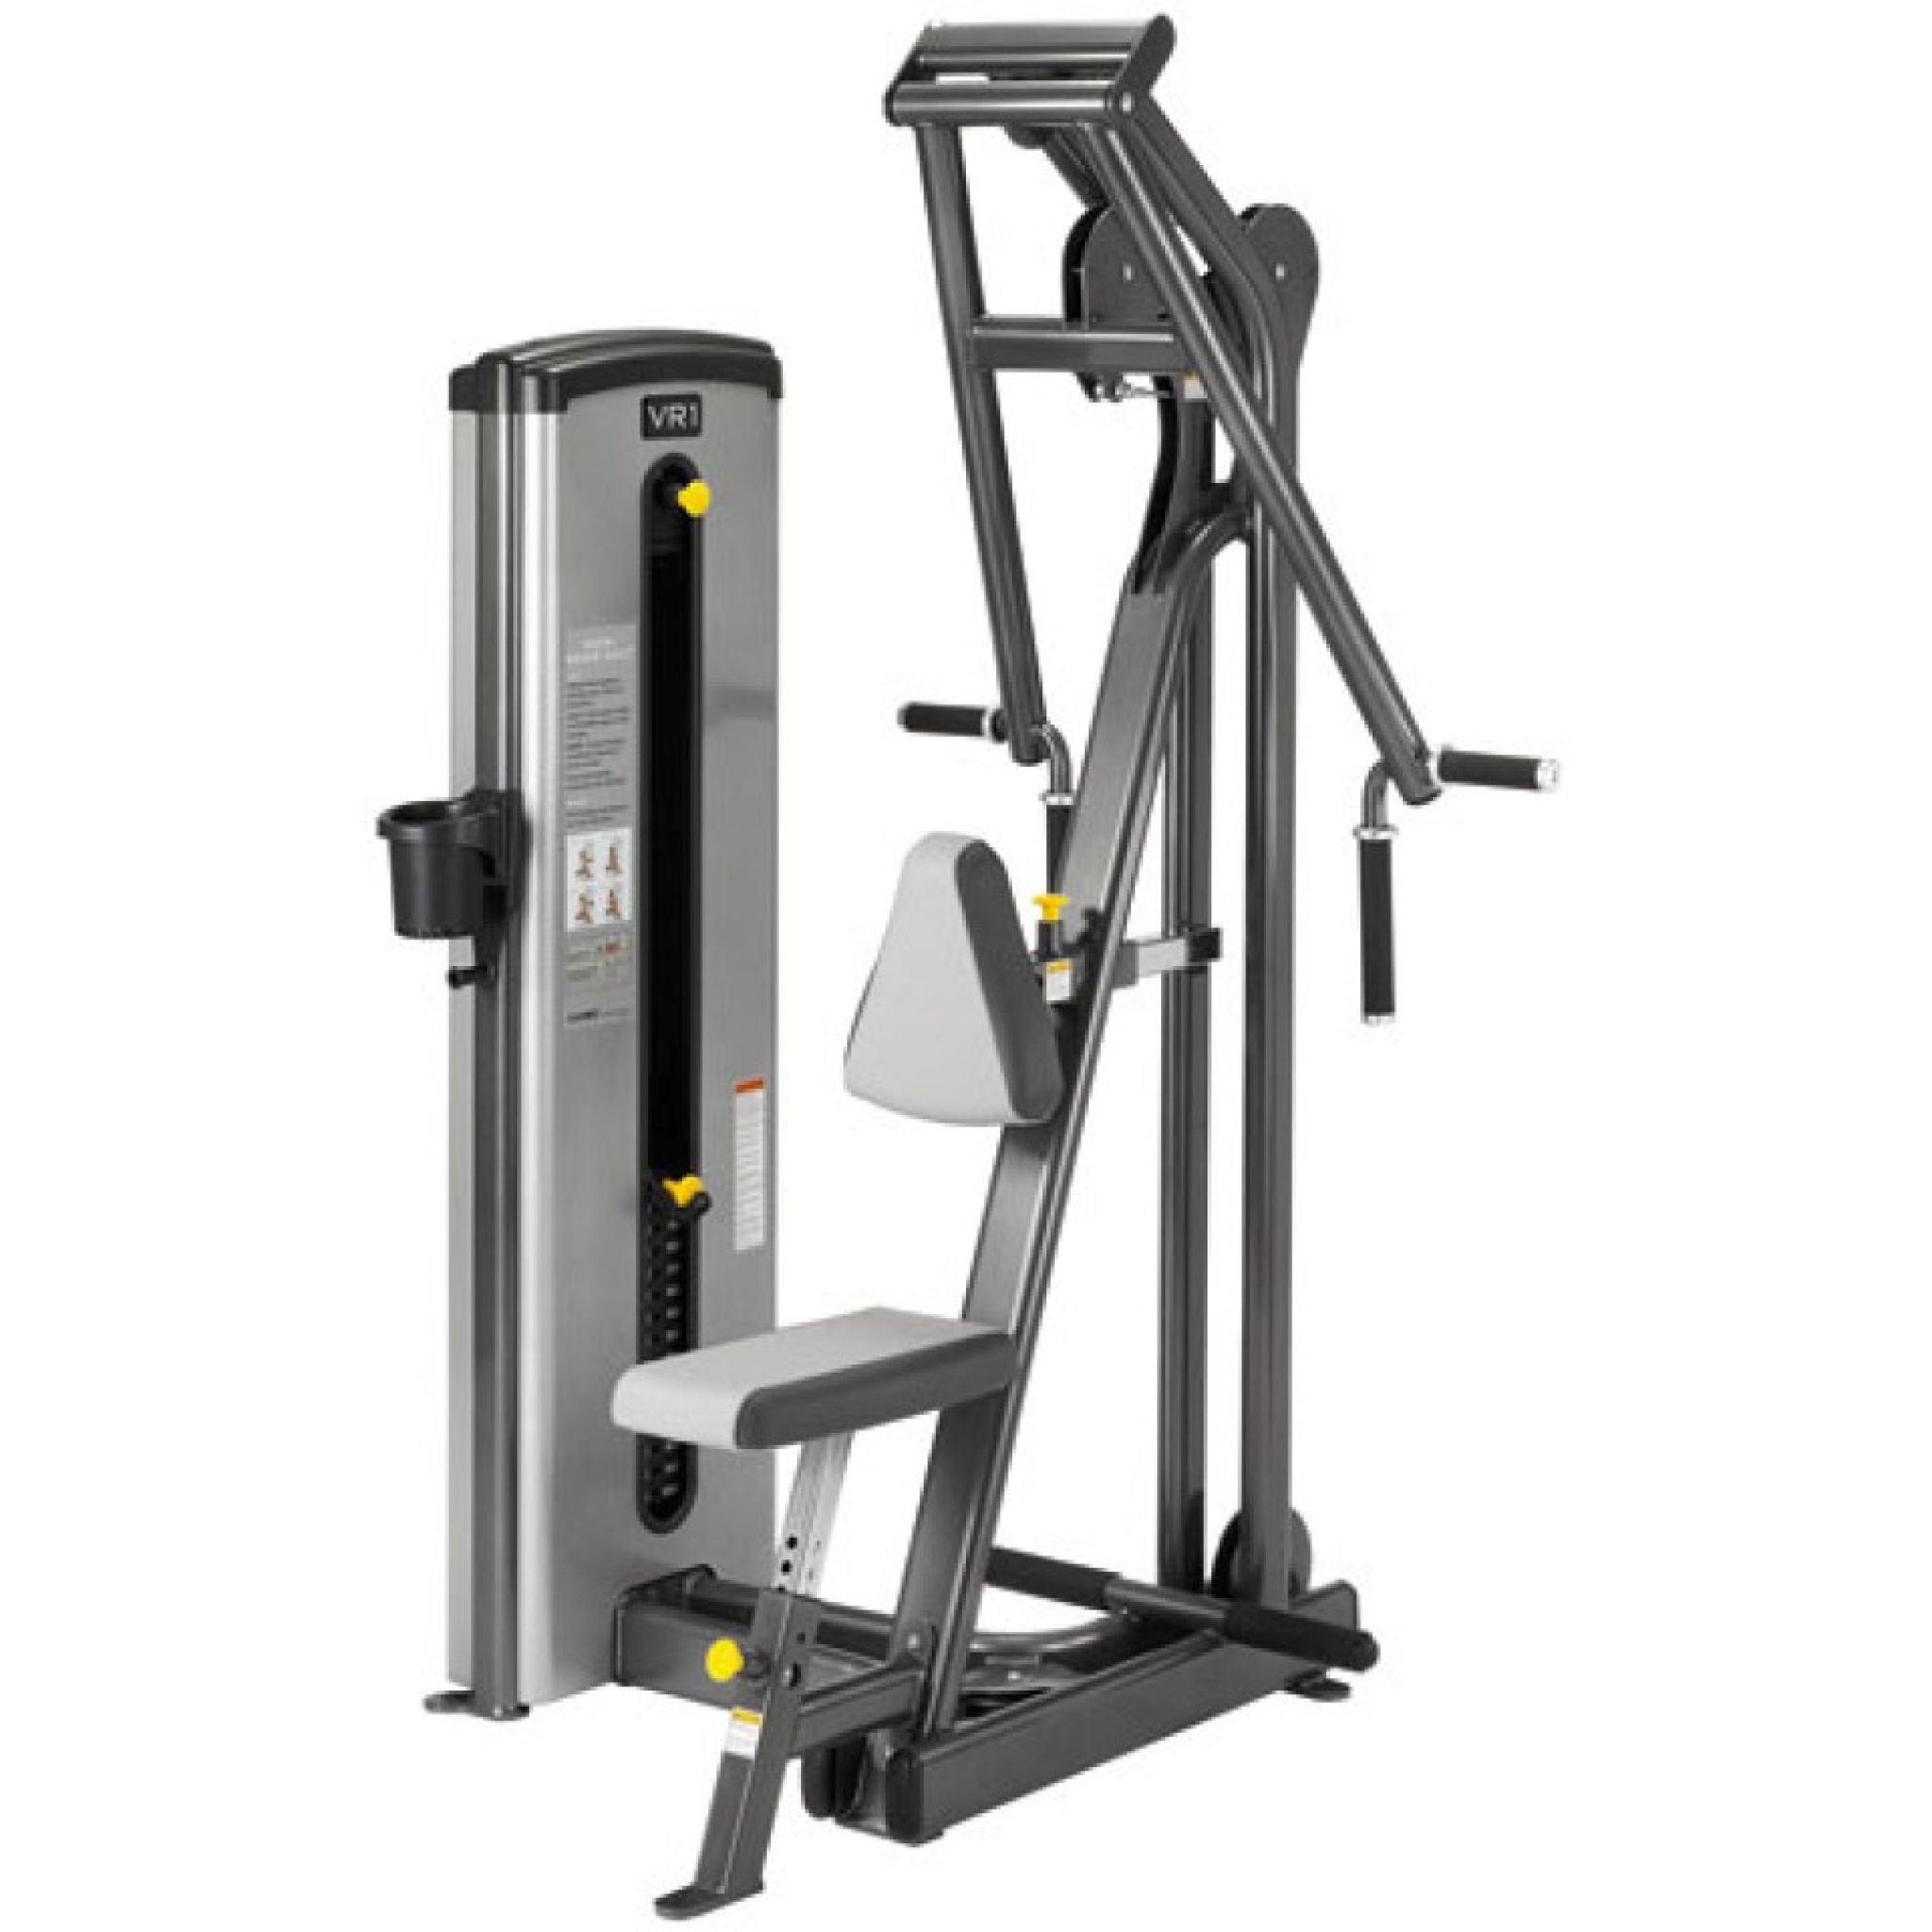 Used Cybex VR1 Row and Rear Delt Machine